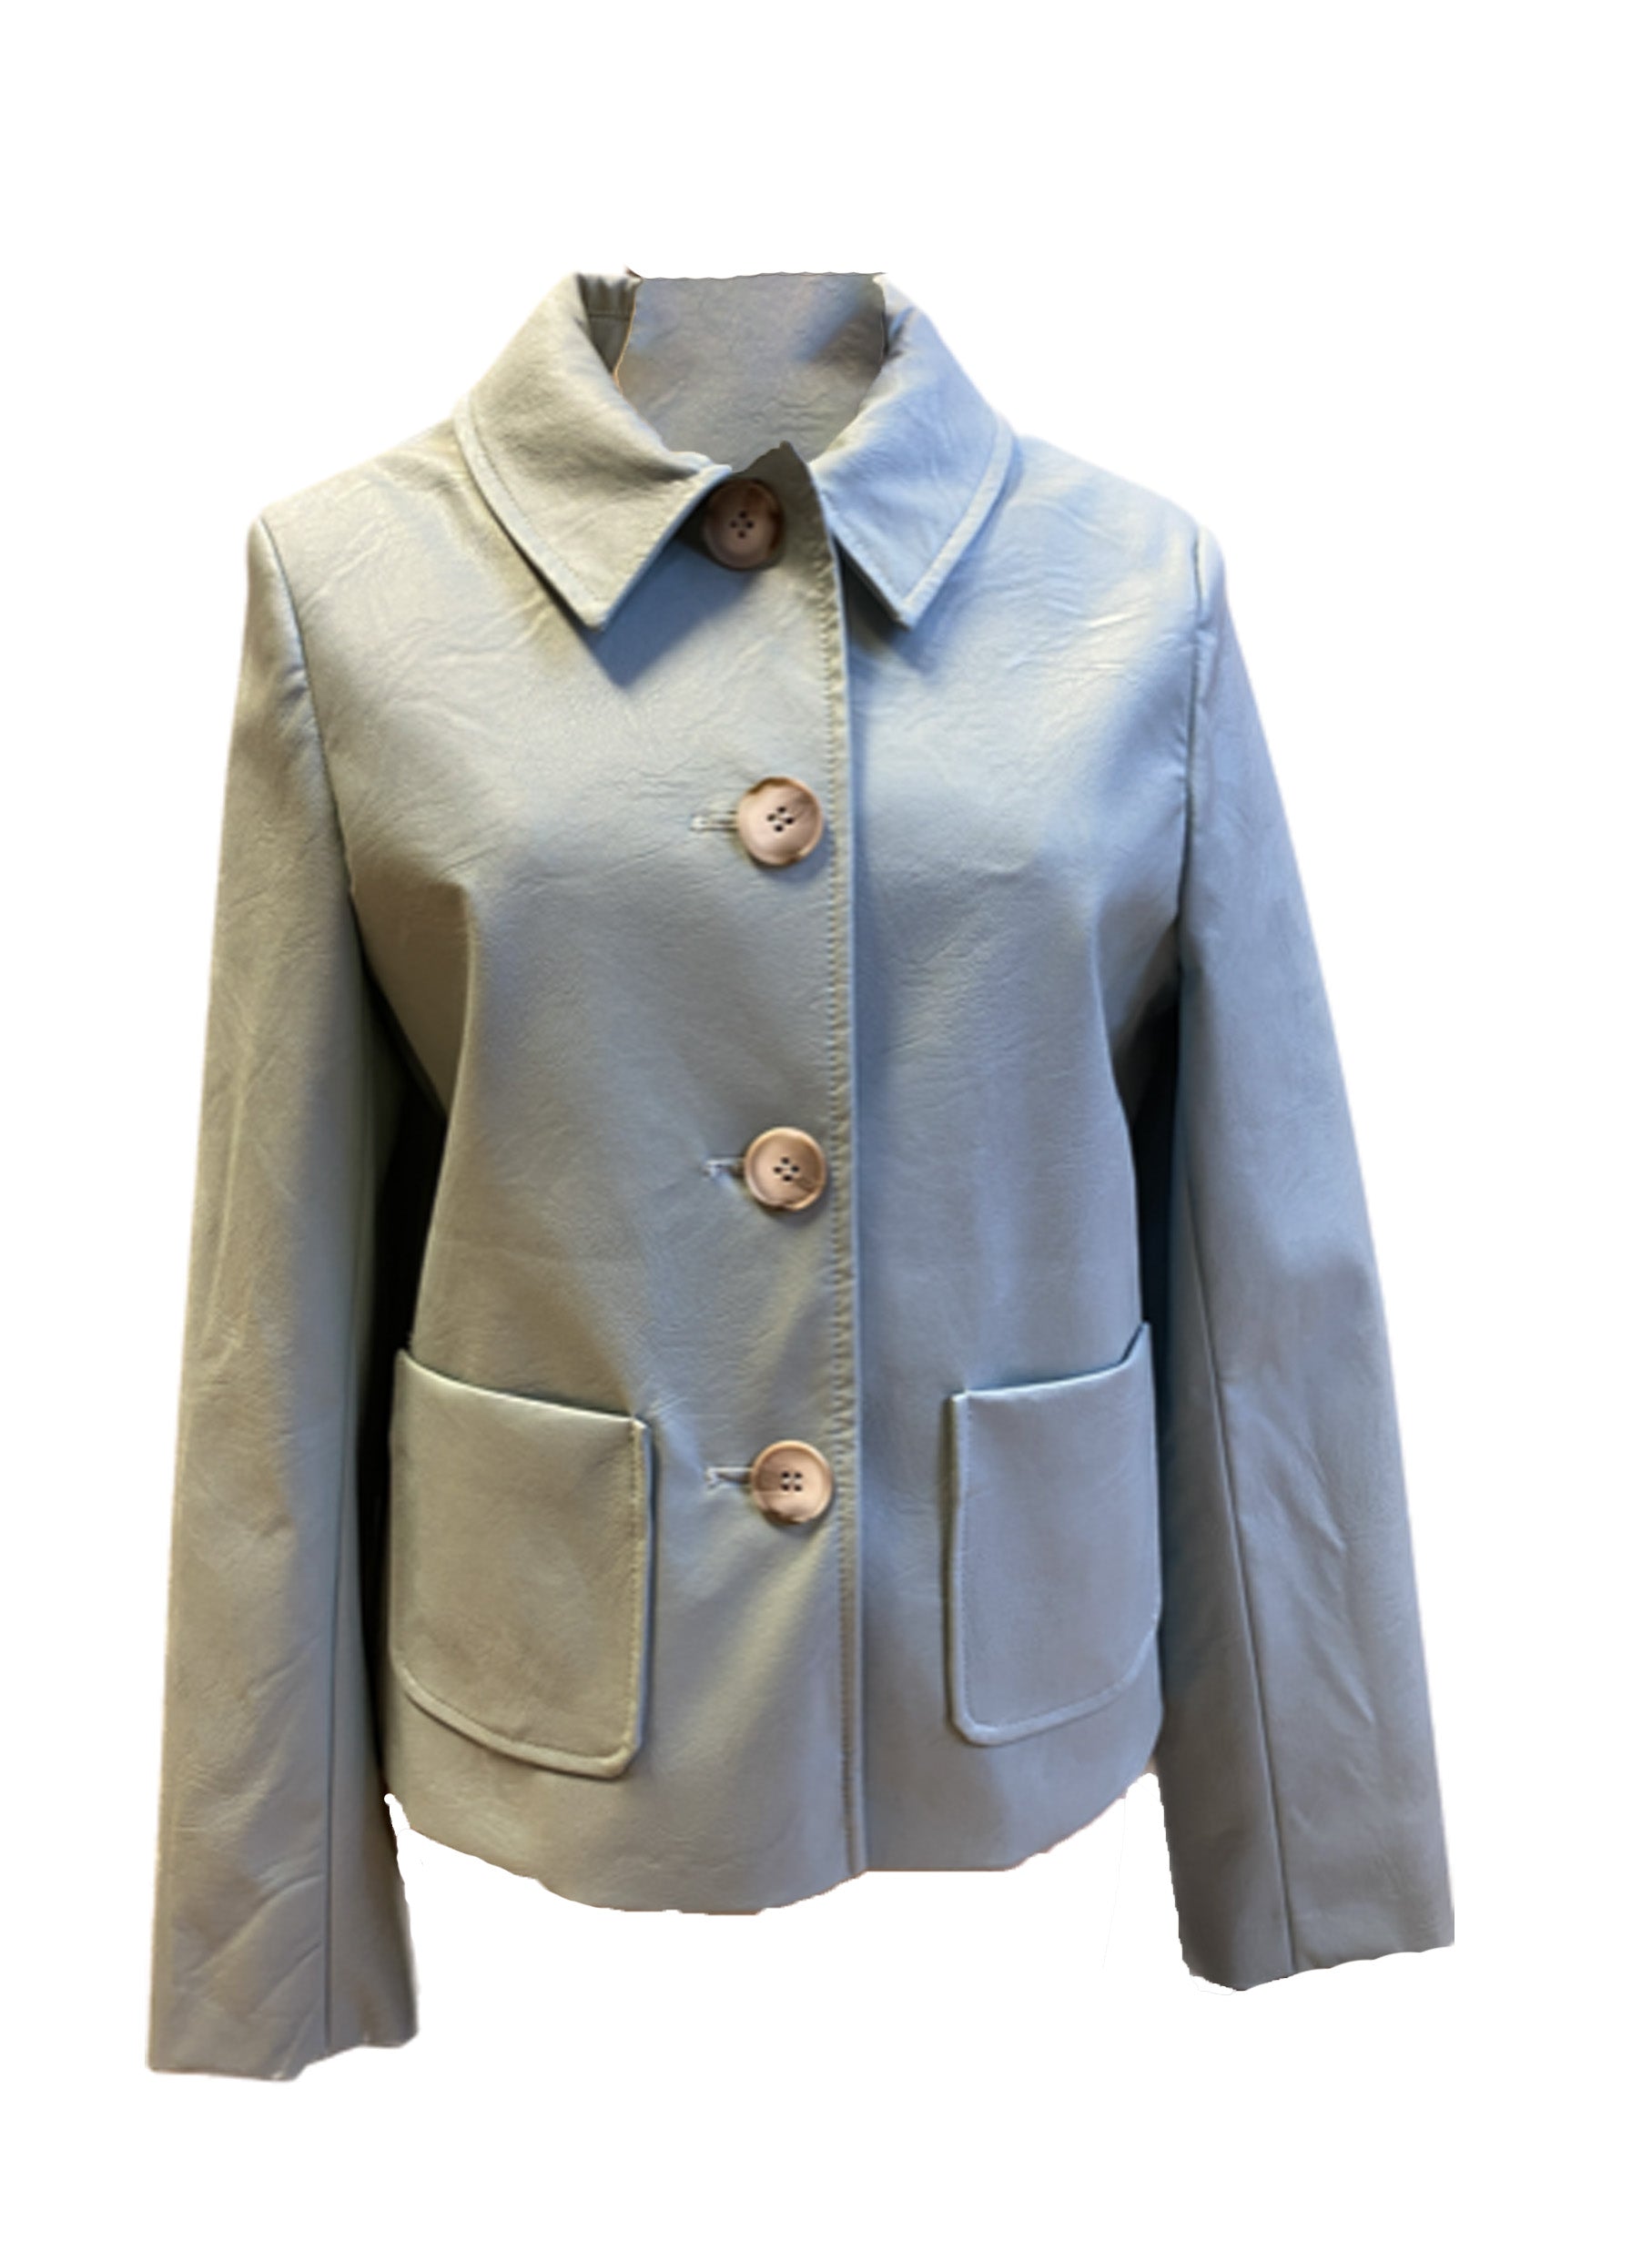 Regal Faux Leather Button-Up Jacket in Light Aqua